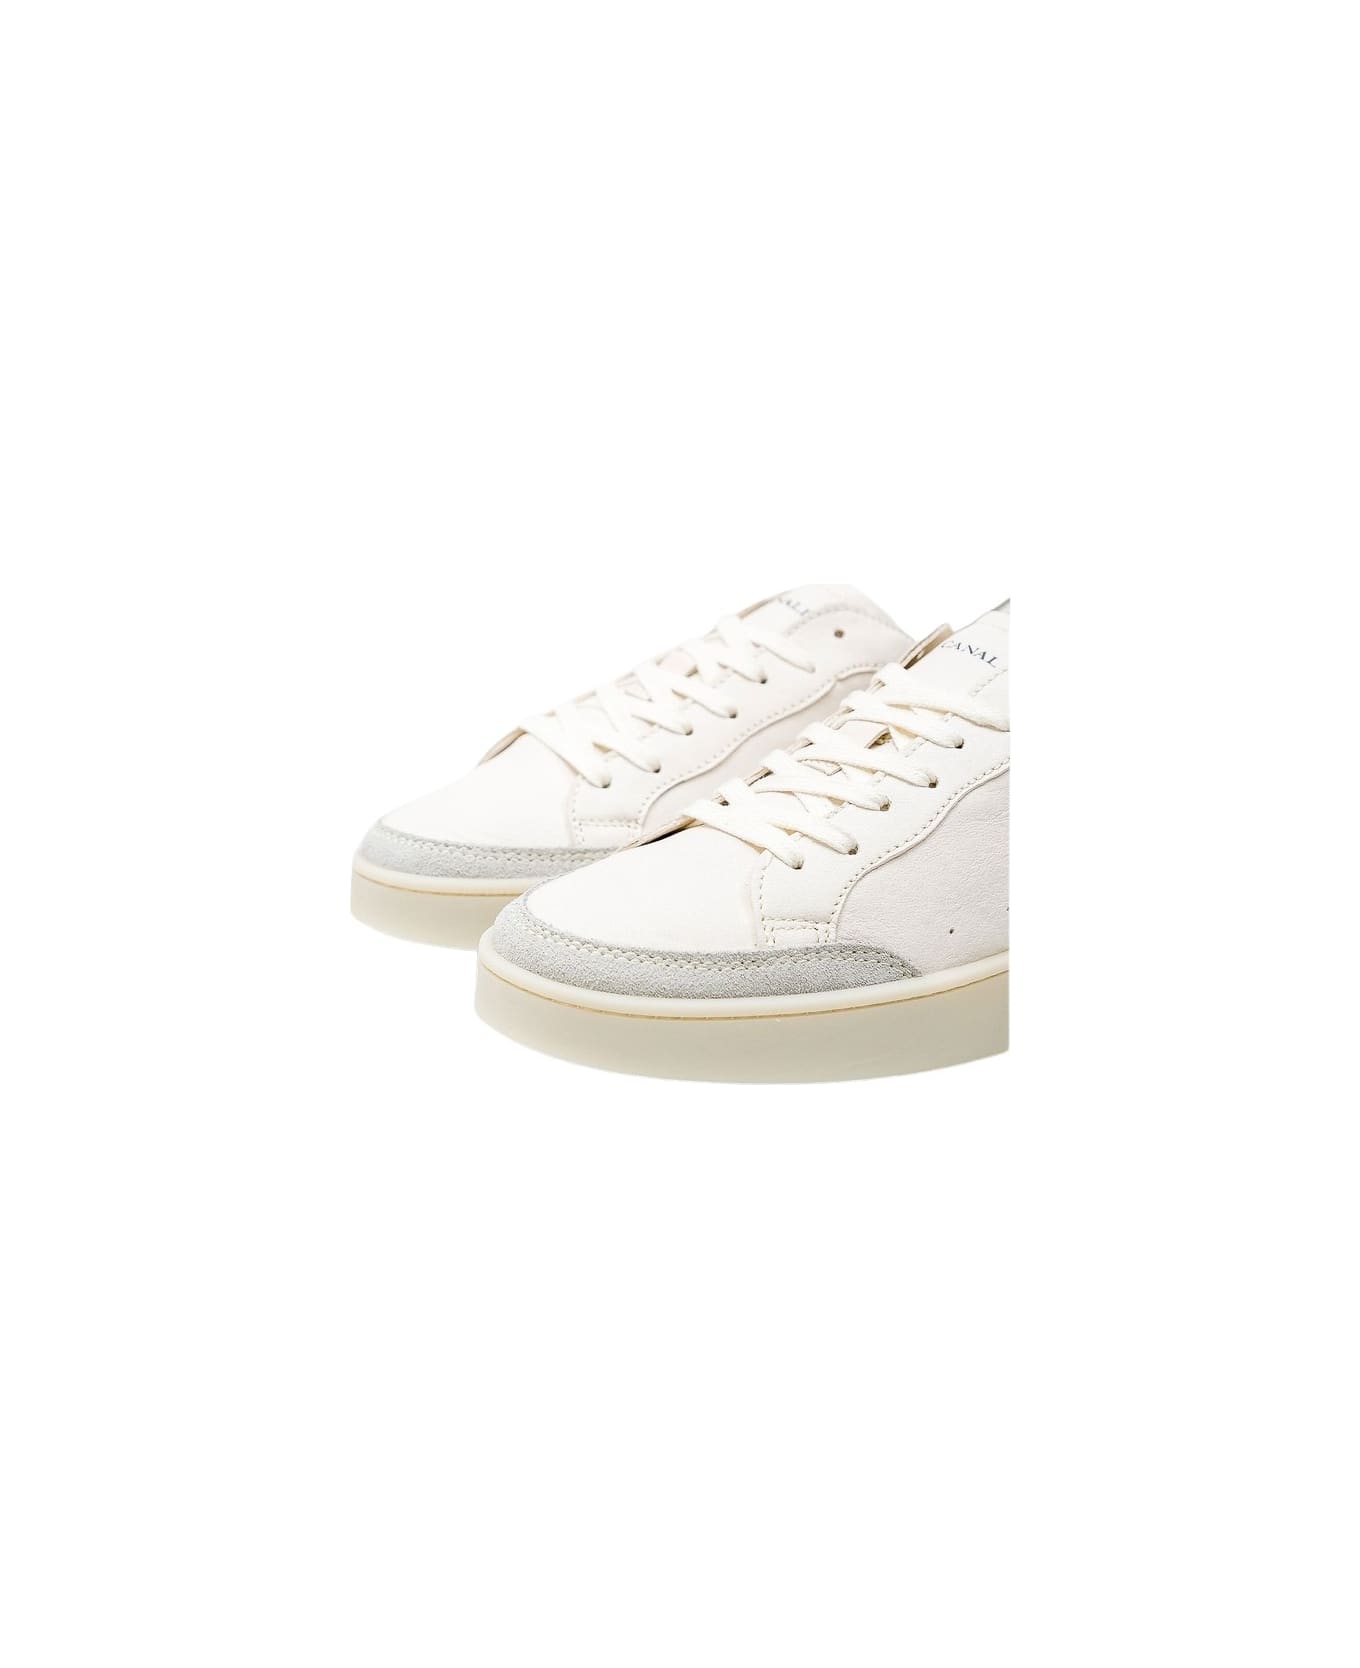 Canali Sneakers - White